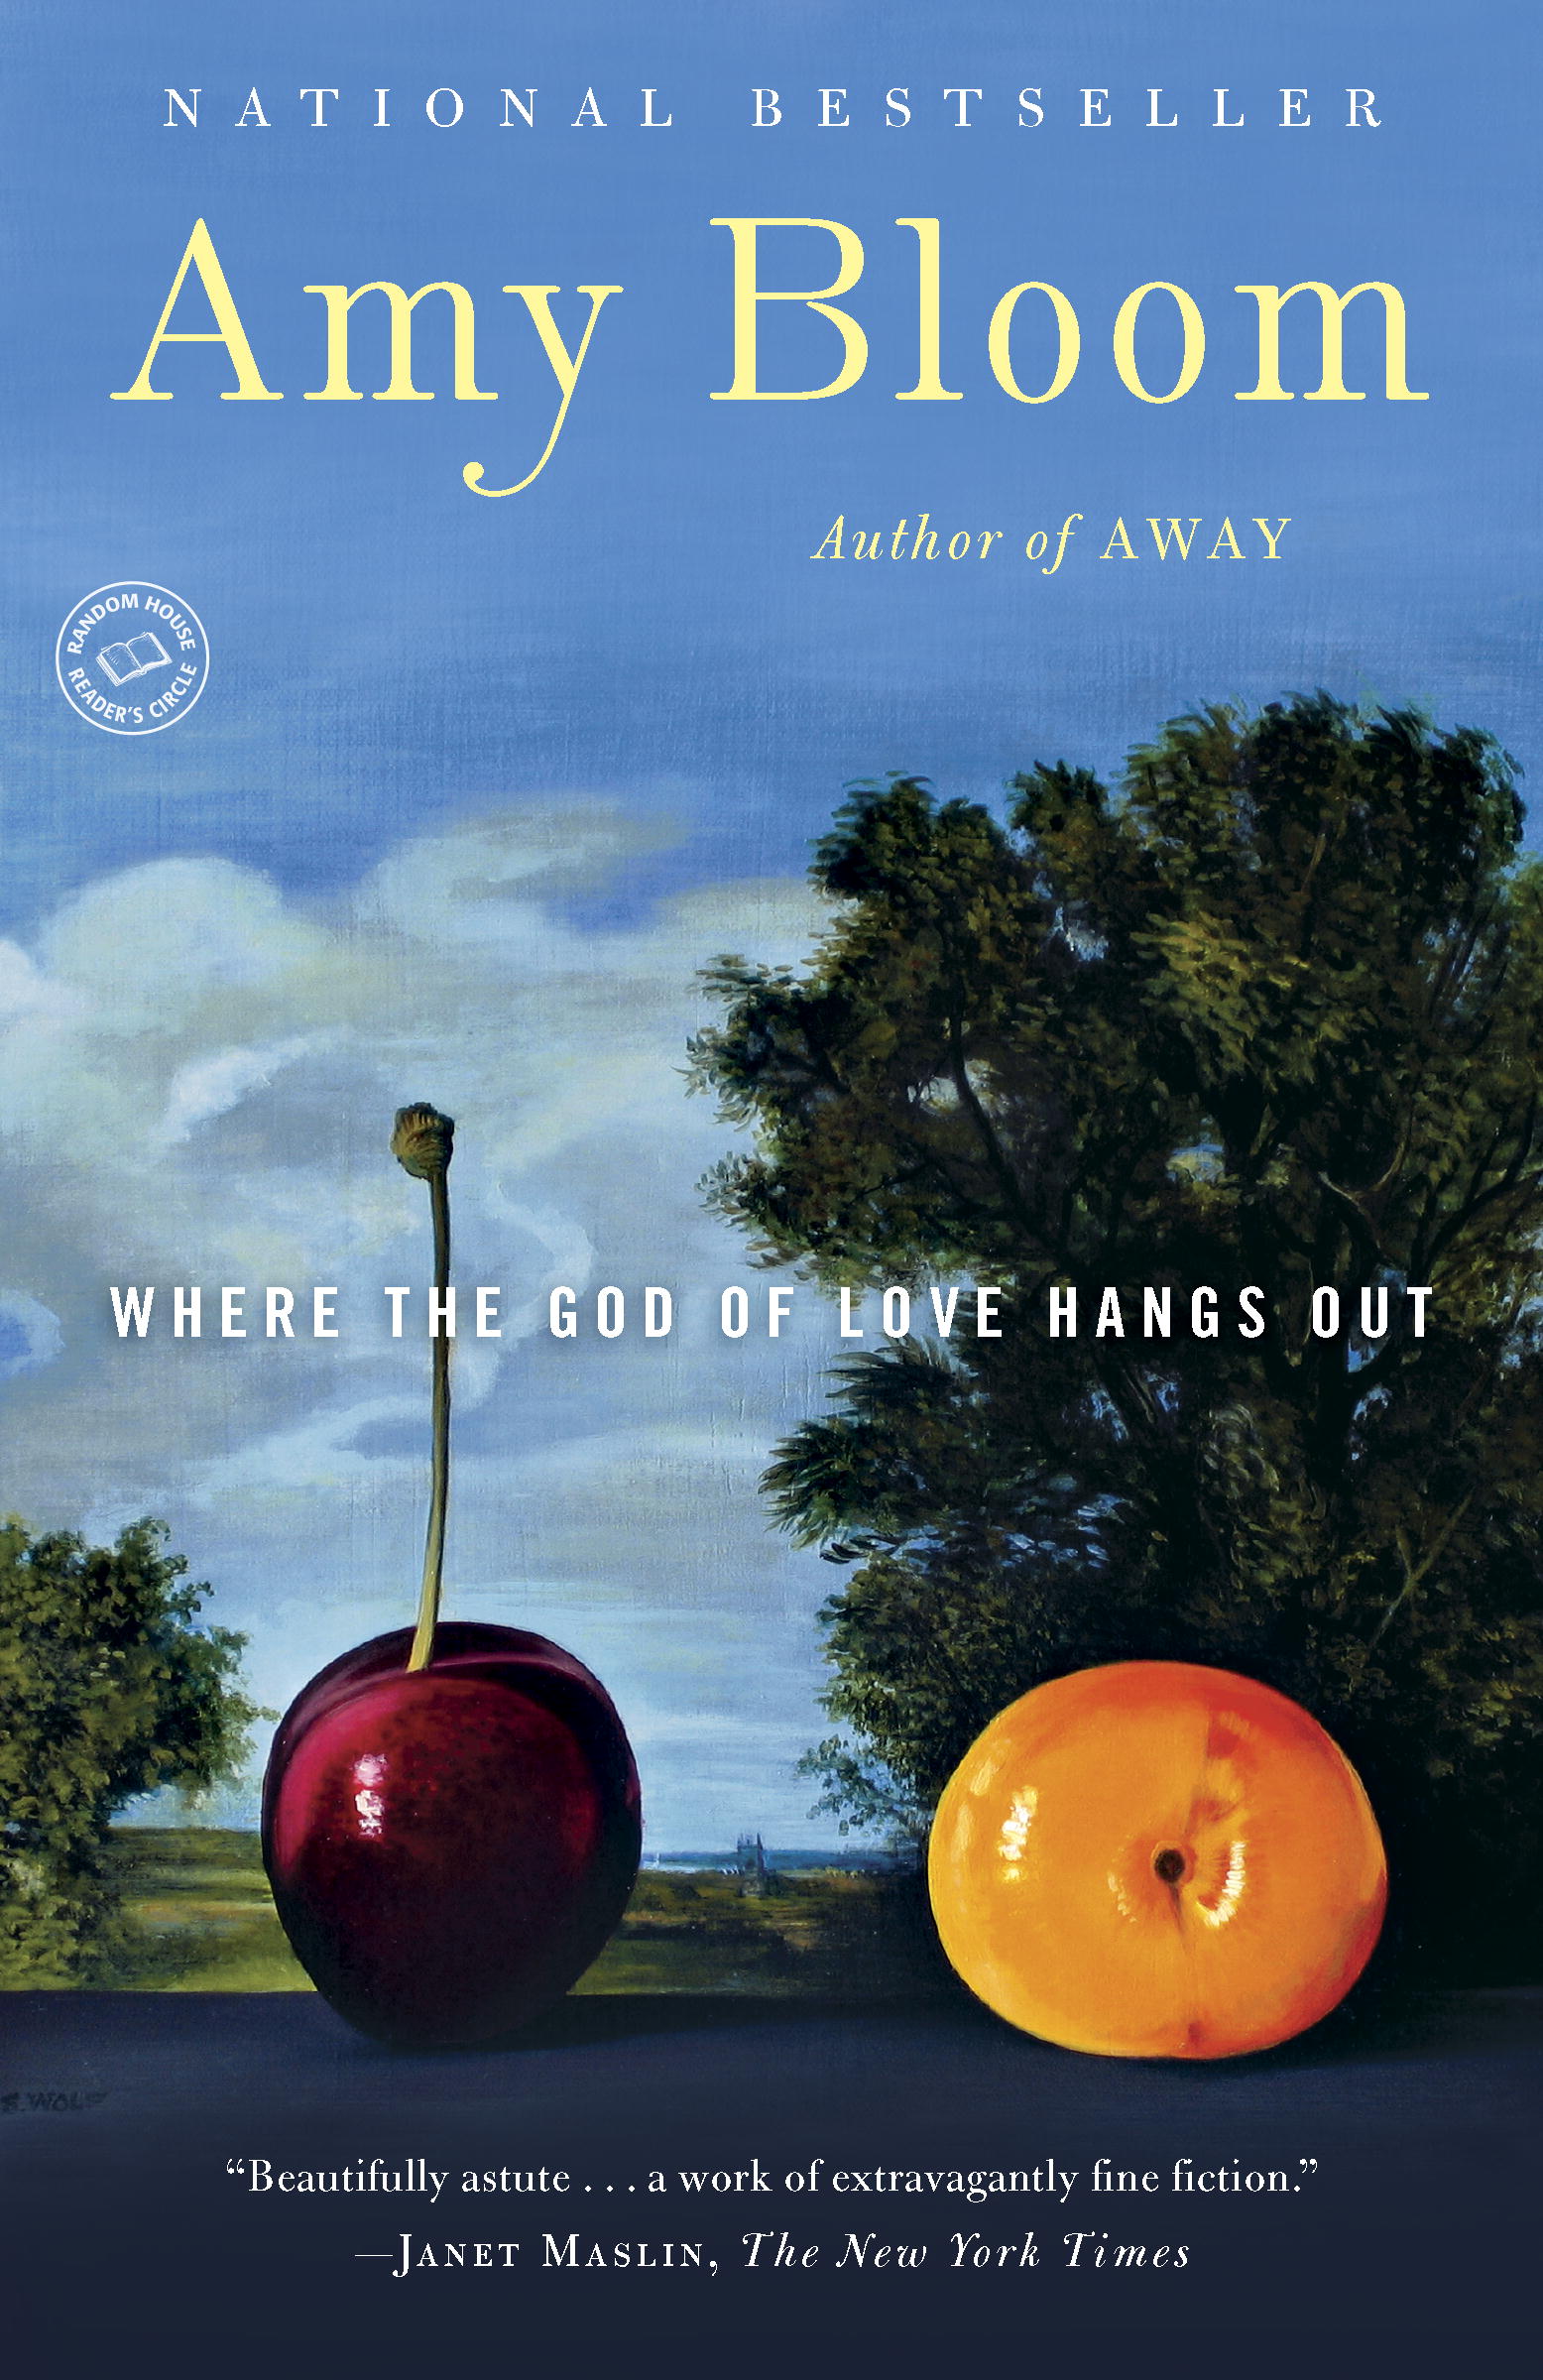 Where the God of Love Hangs Out by Amy Bloom